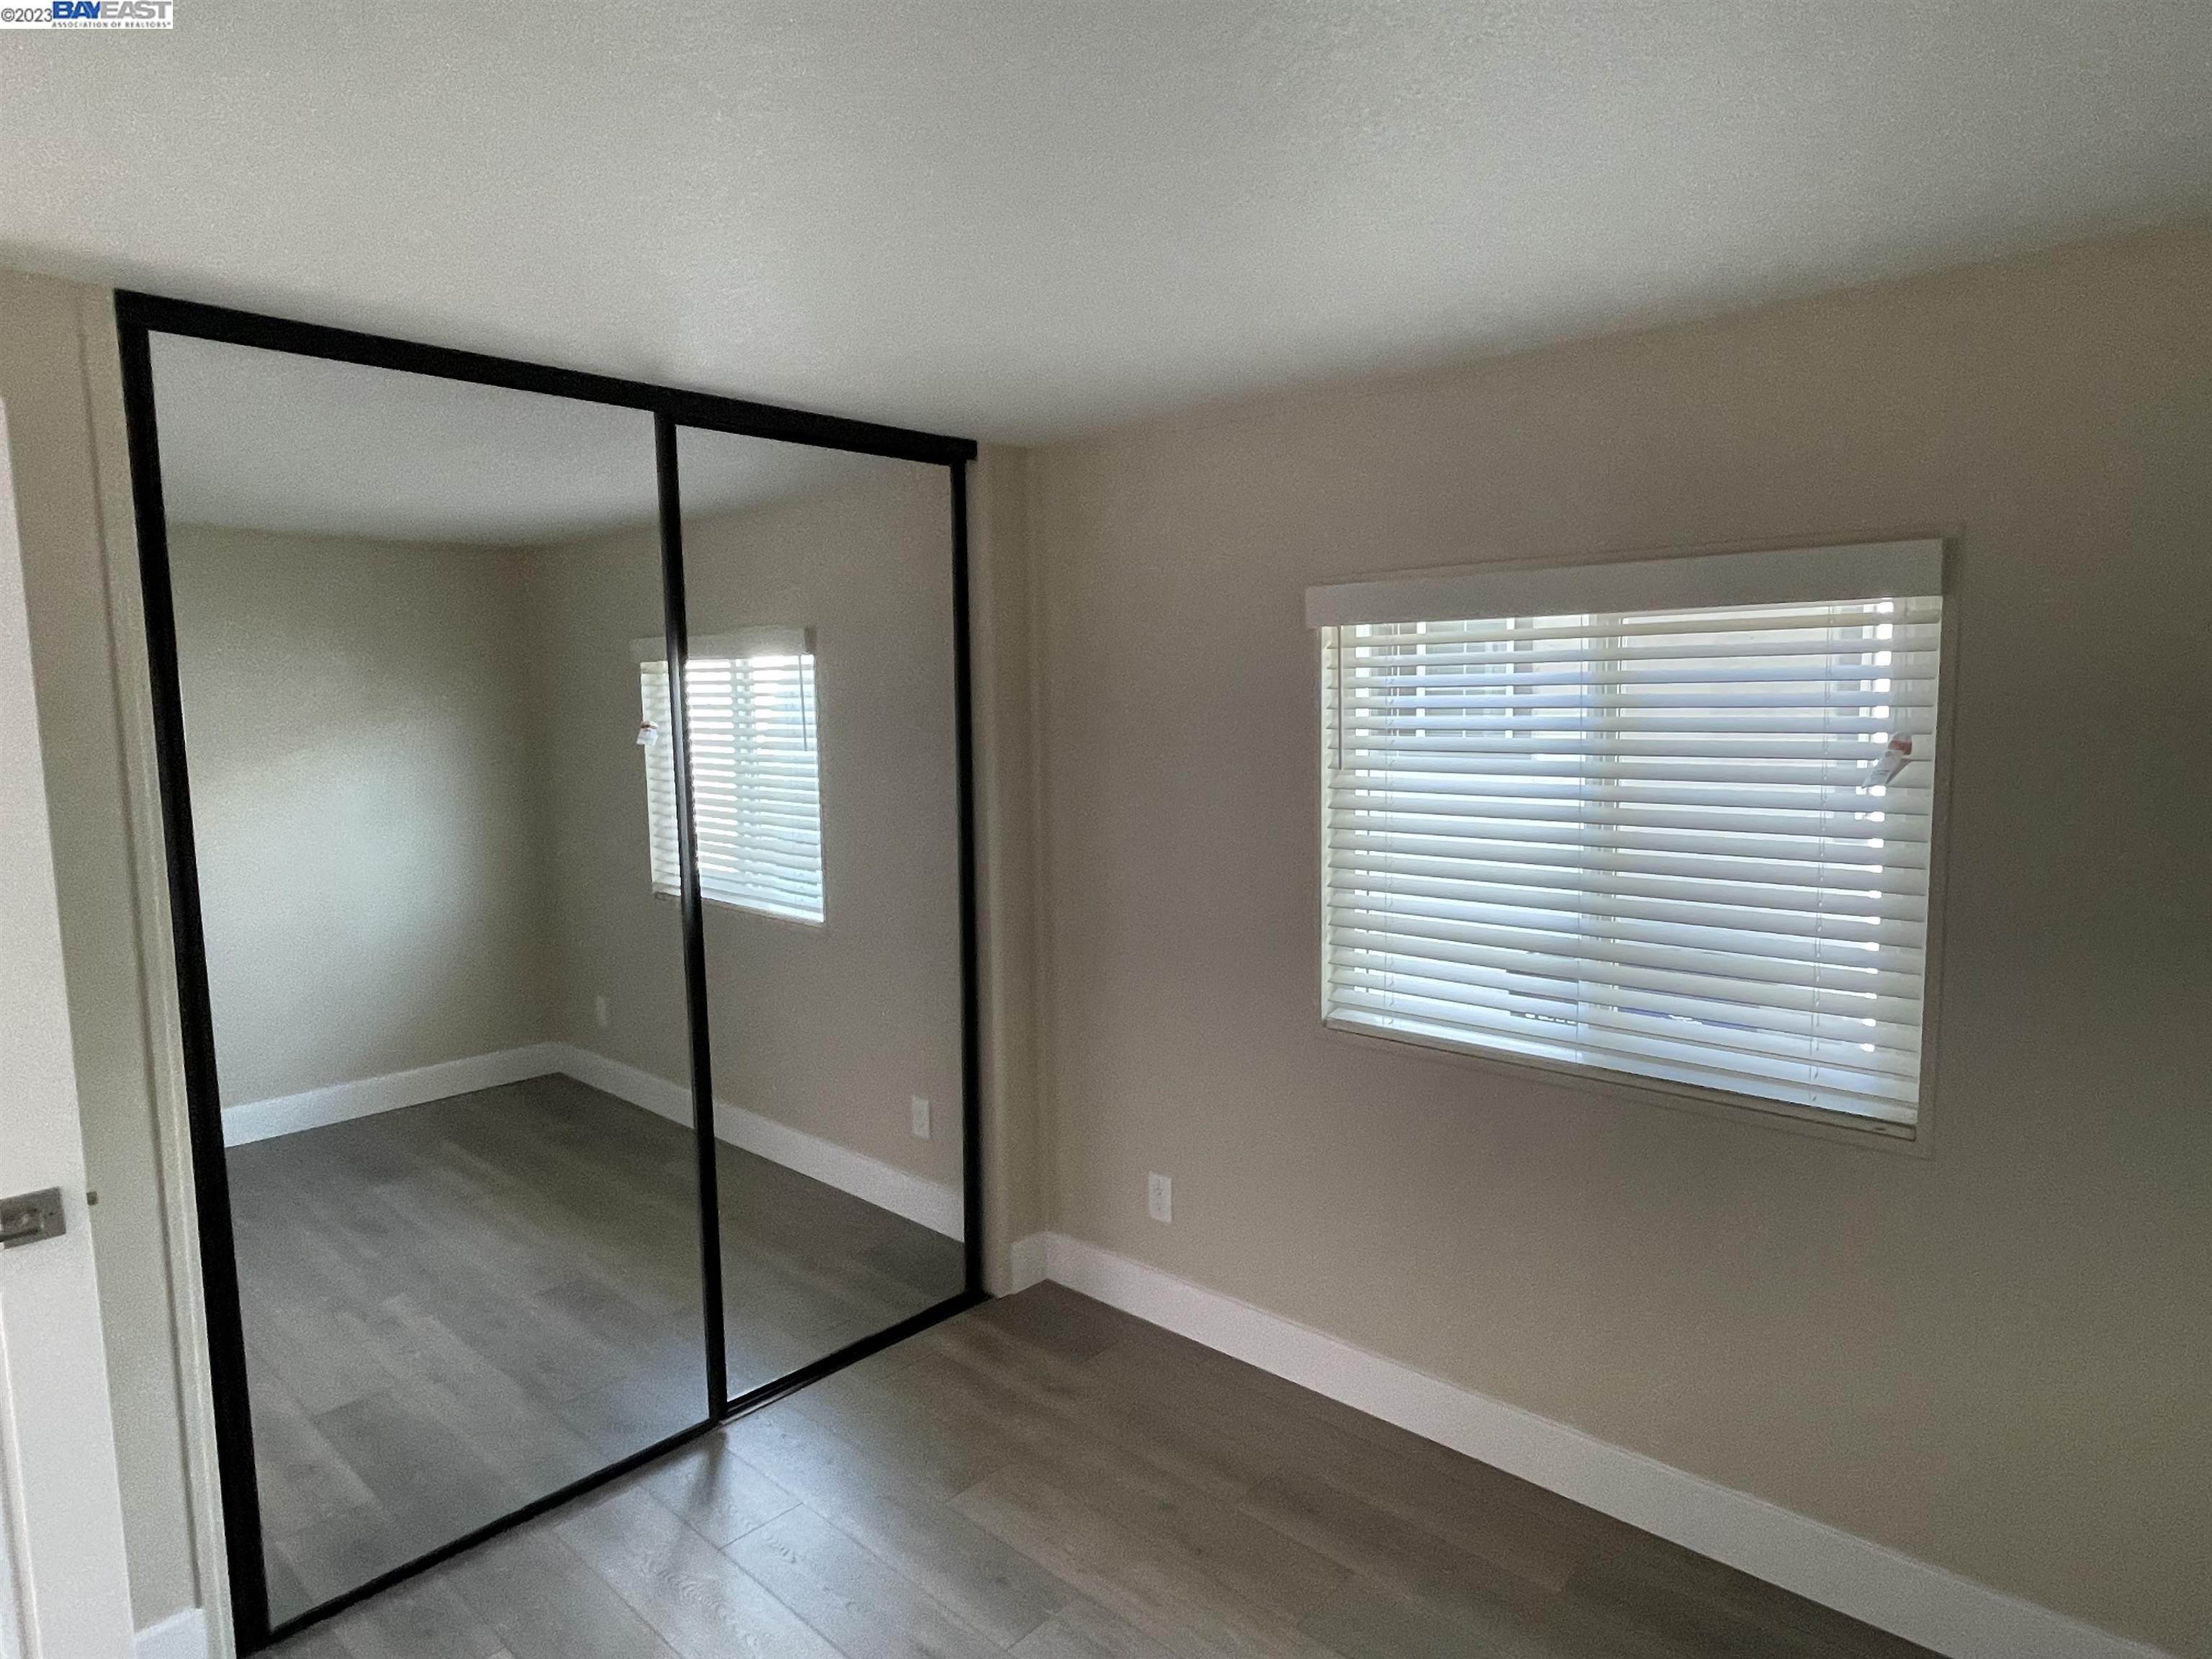 42. Mobile Home for Sale at Hayward, CA 94545